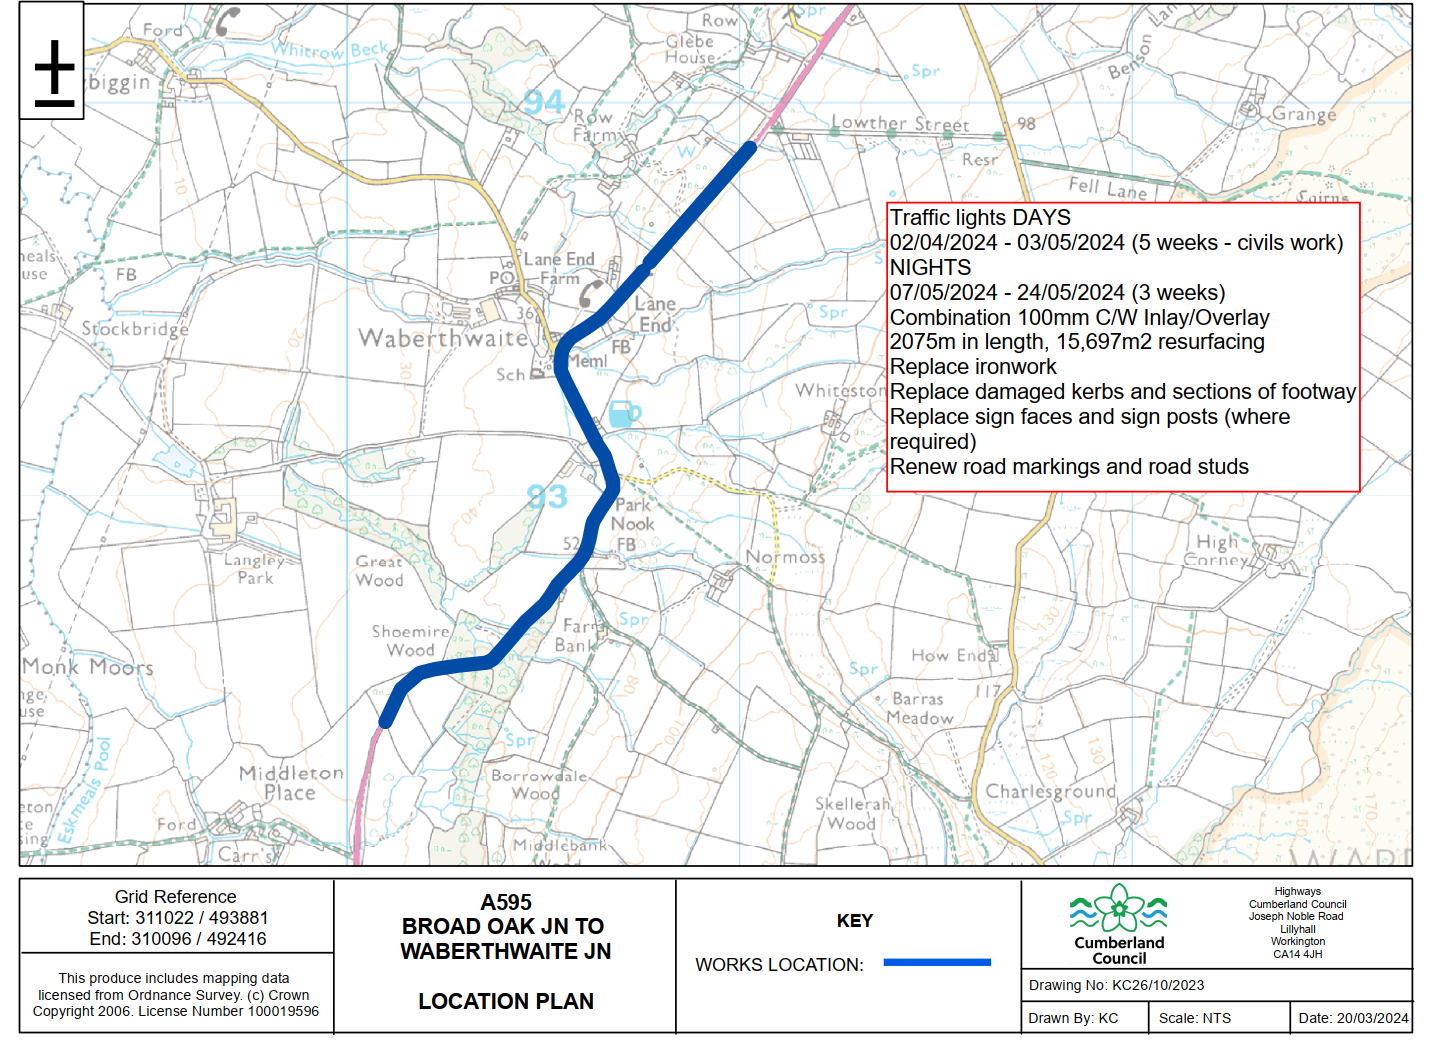 A595 Road closure – Waberthwaite – 7th May 2024 – 24th May 2024, 7pm to 5 am